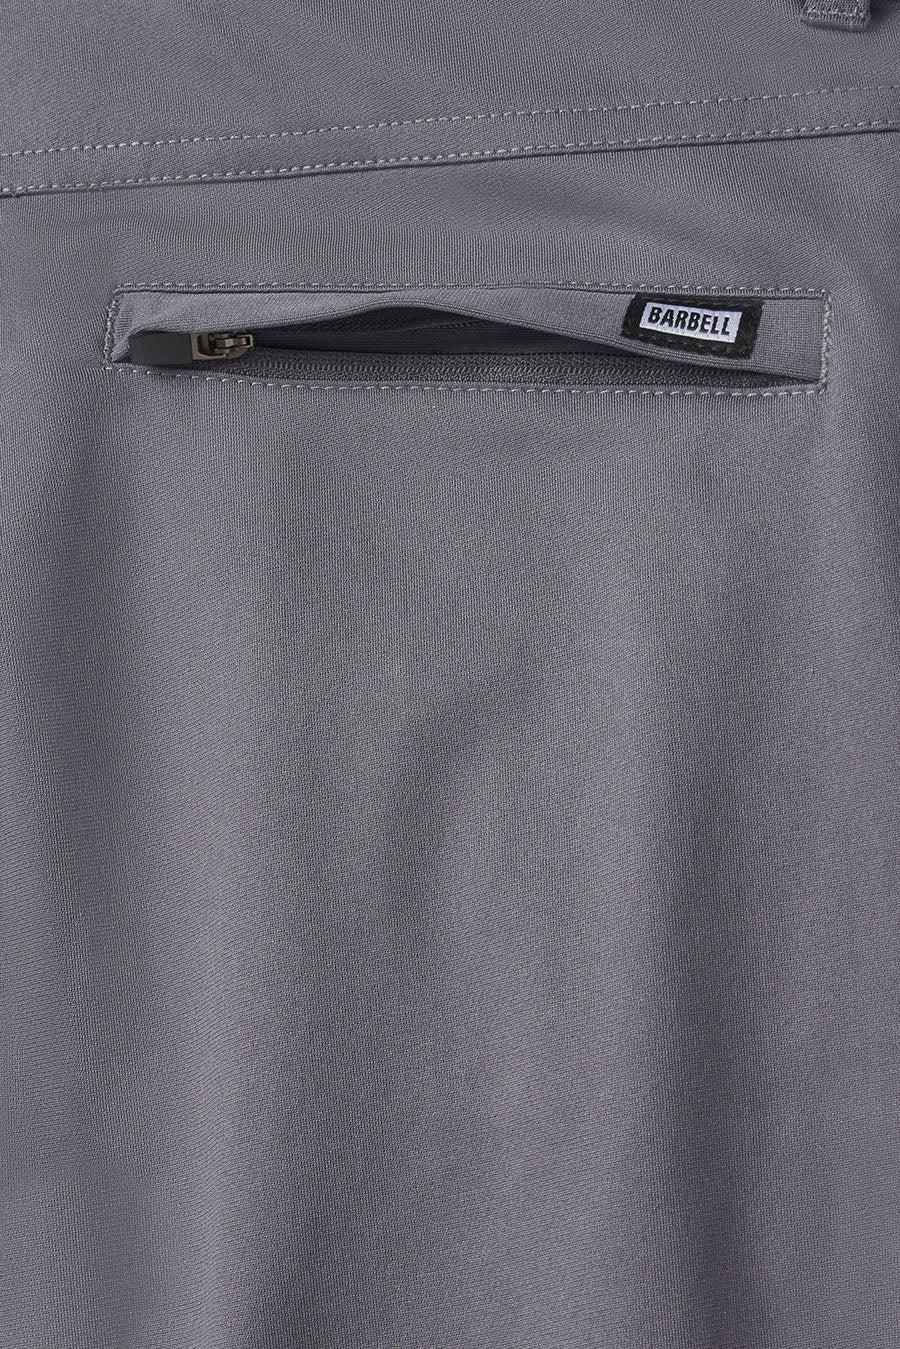 Anything Dress Pant Straight - Slate - photo from back pocket detail #color_slate